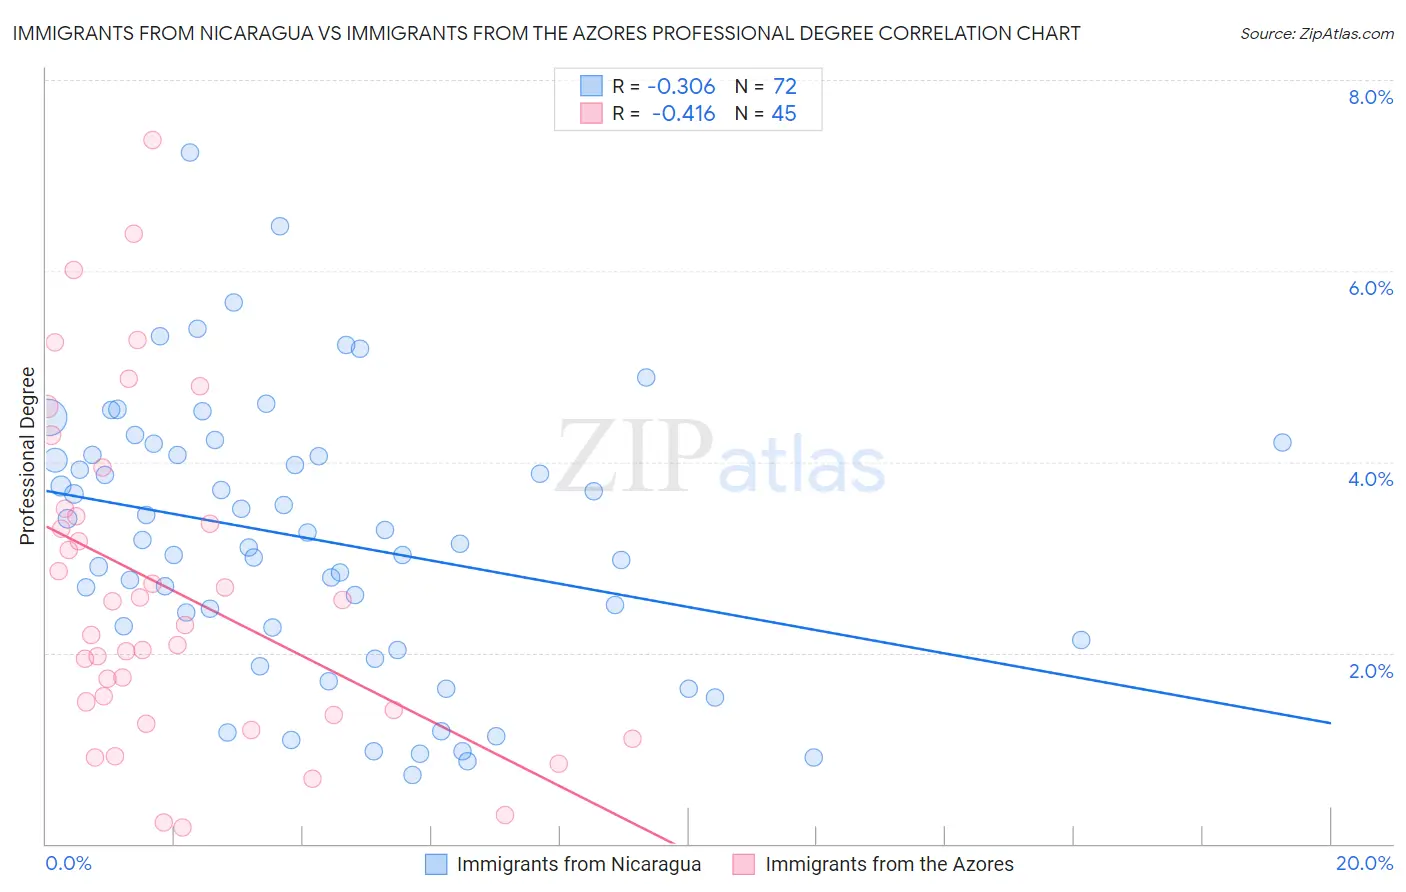 Immigrants from Nicaragua vs Immigrants from the Azores Professional Degree